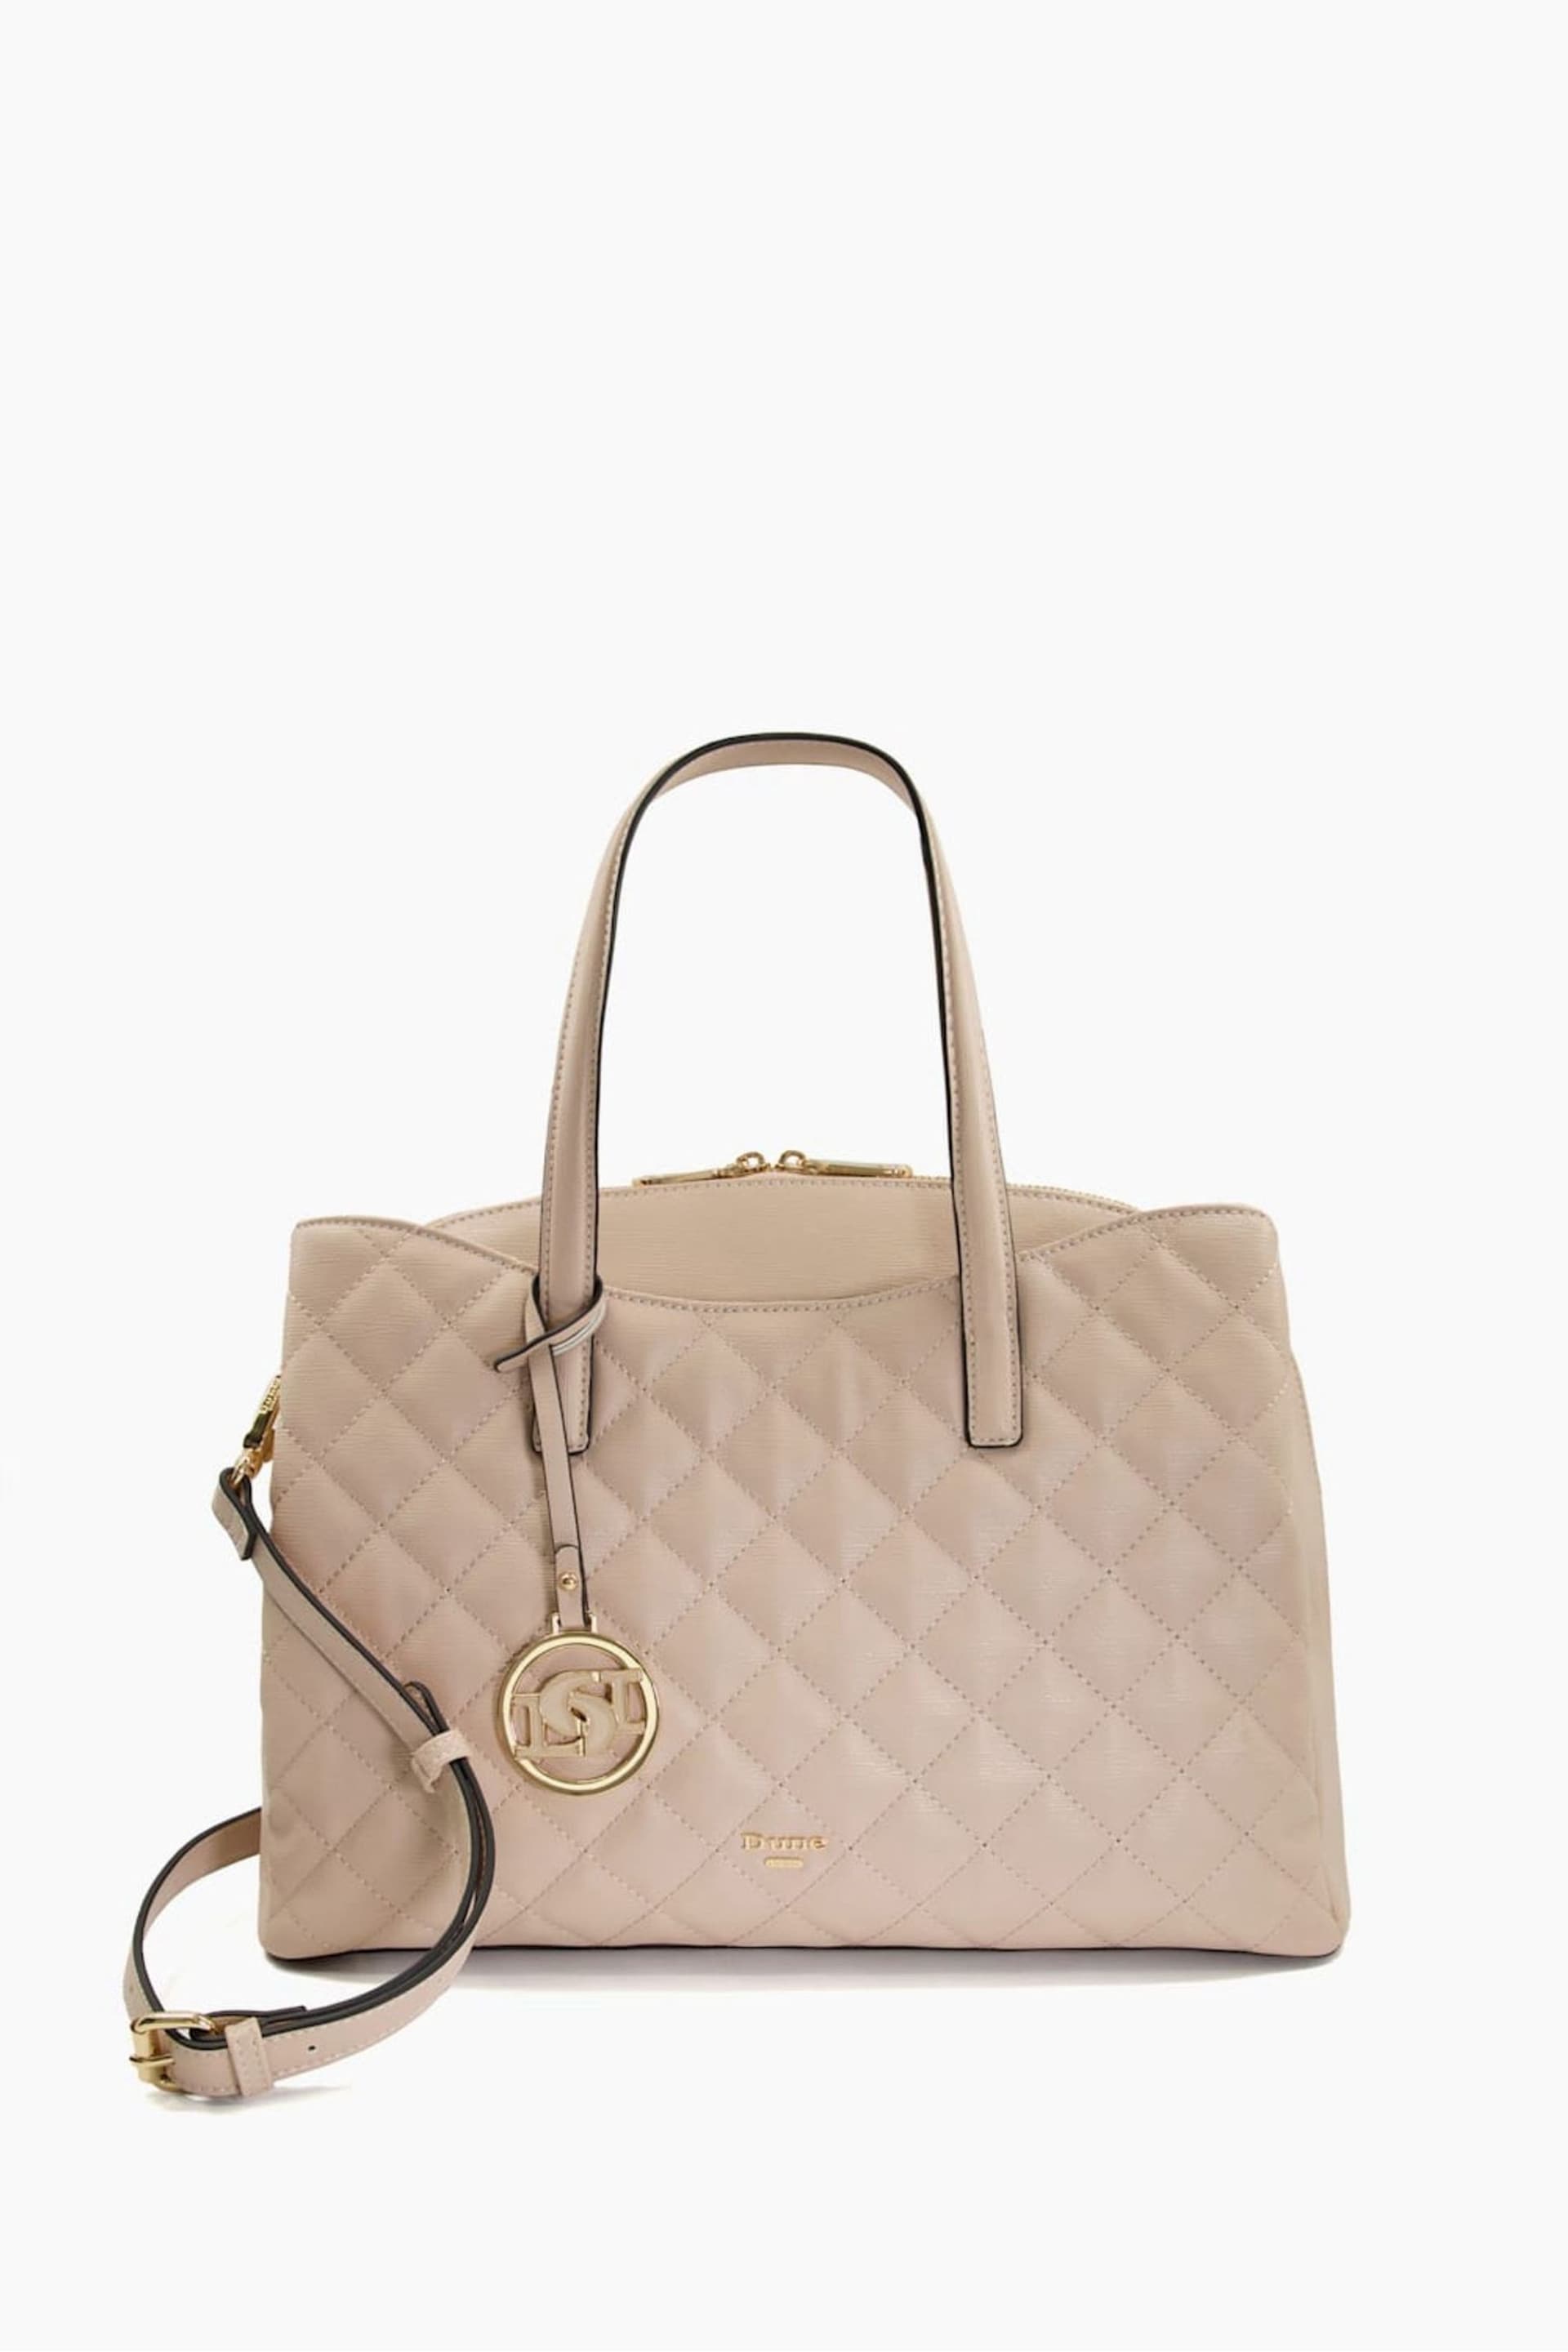 Dune London Nude Large Dignify Quilted Tote Bag - Image 1 of 4